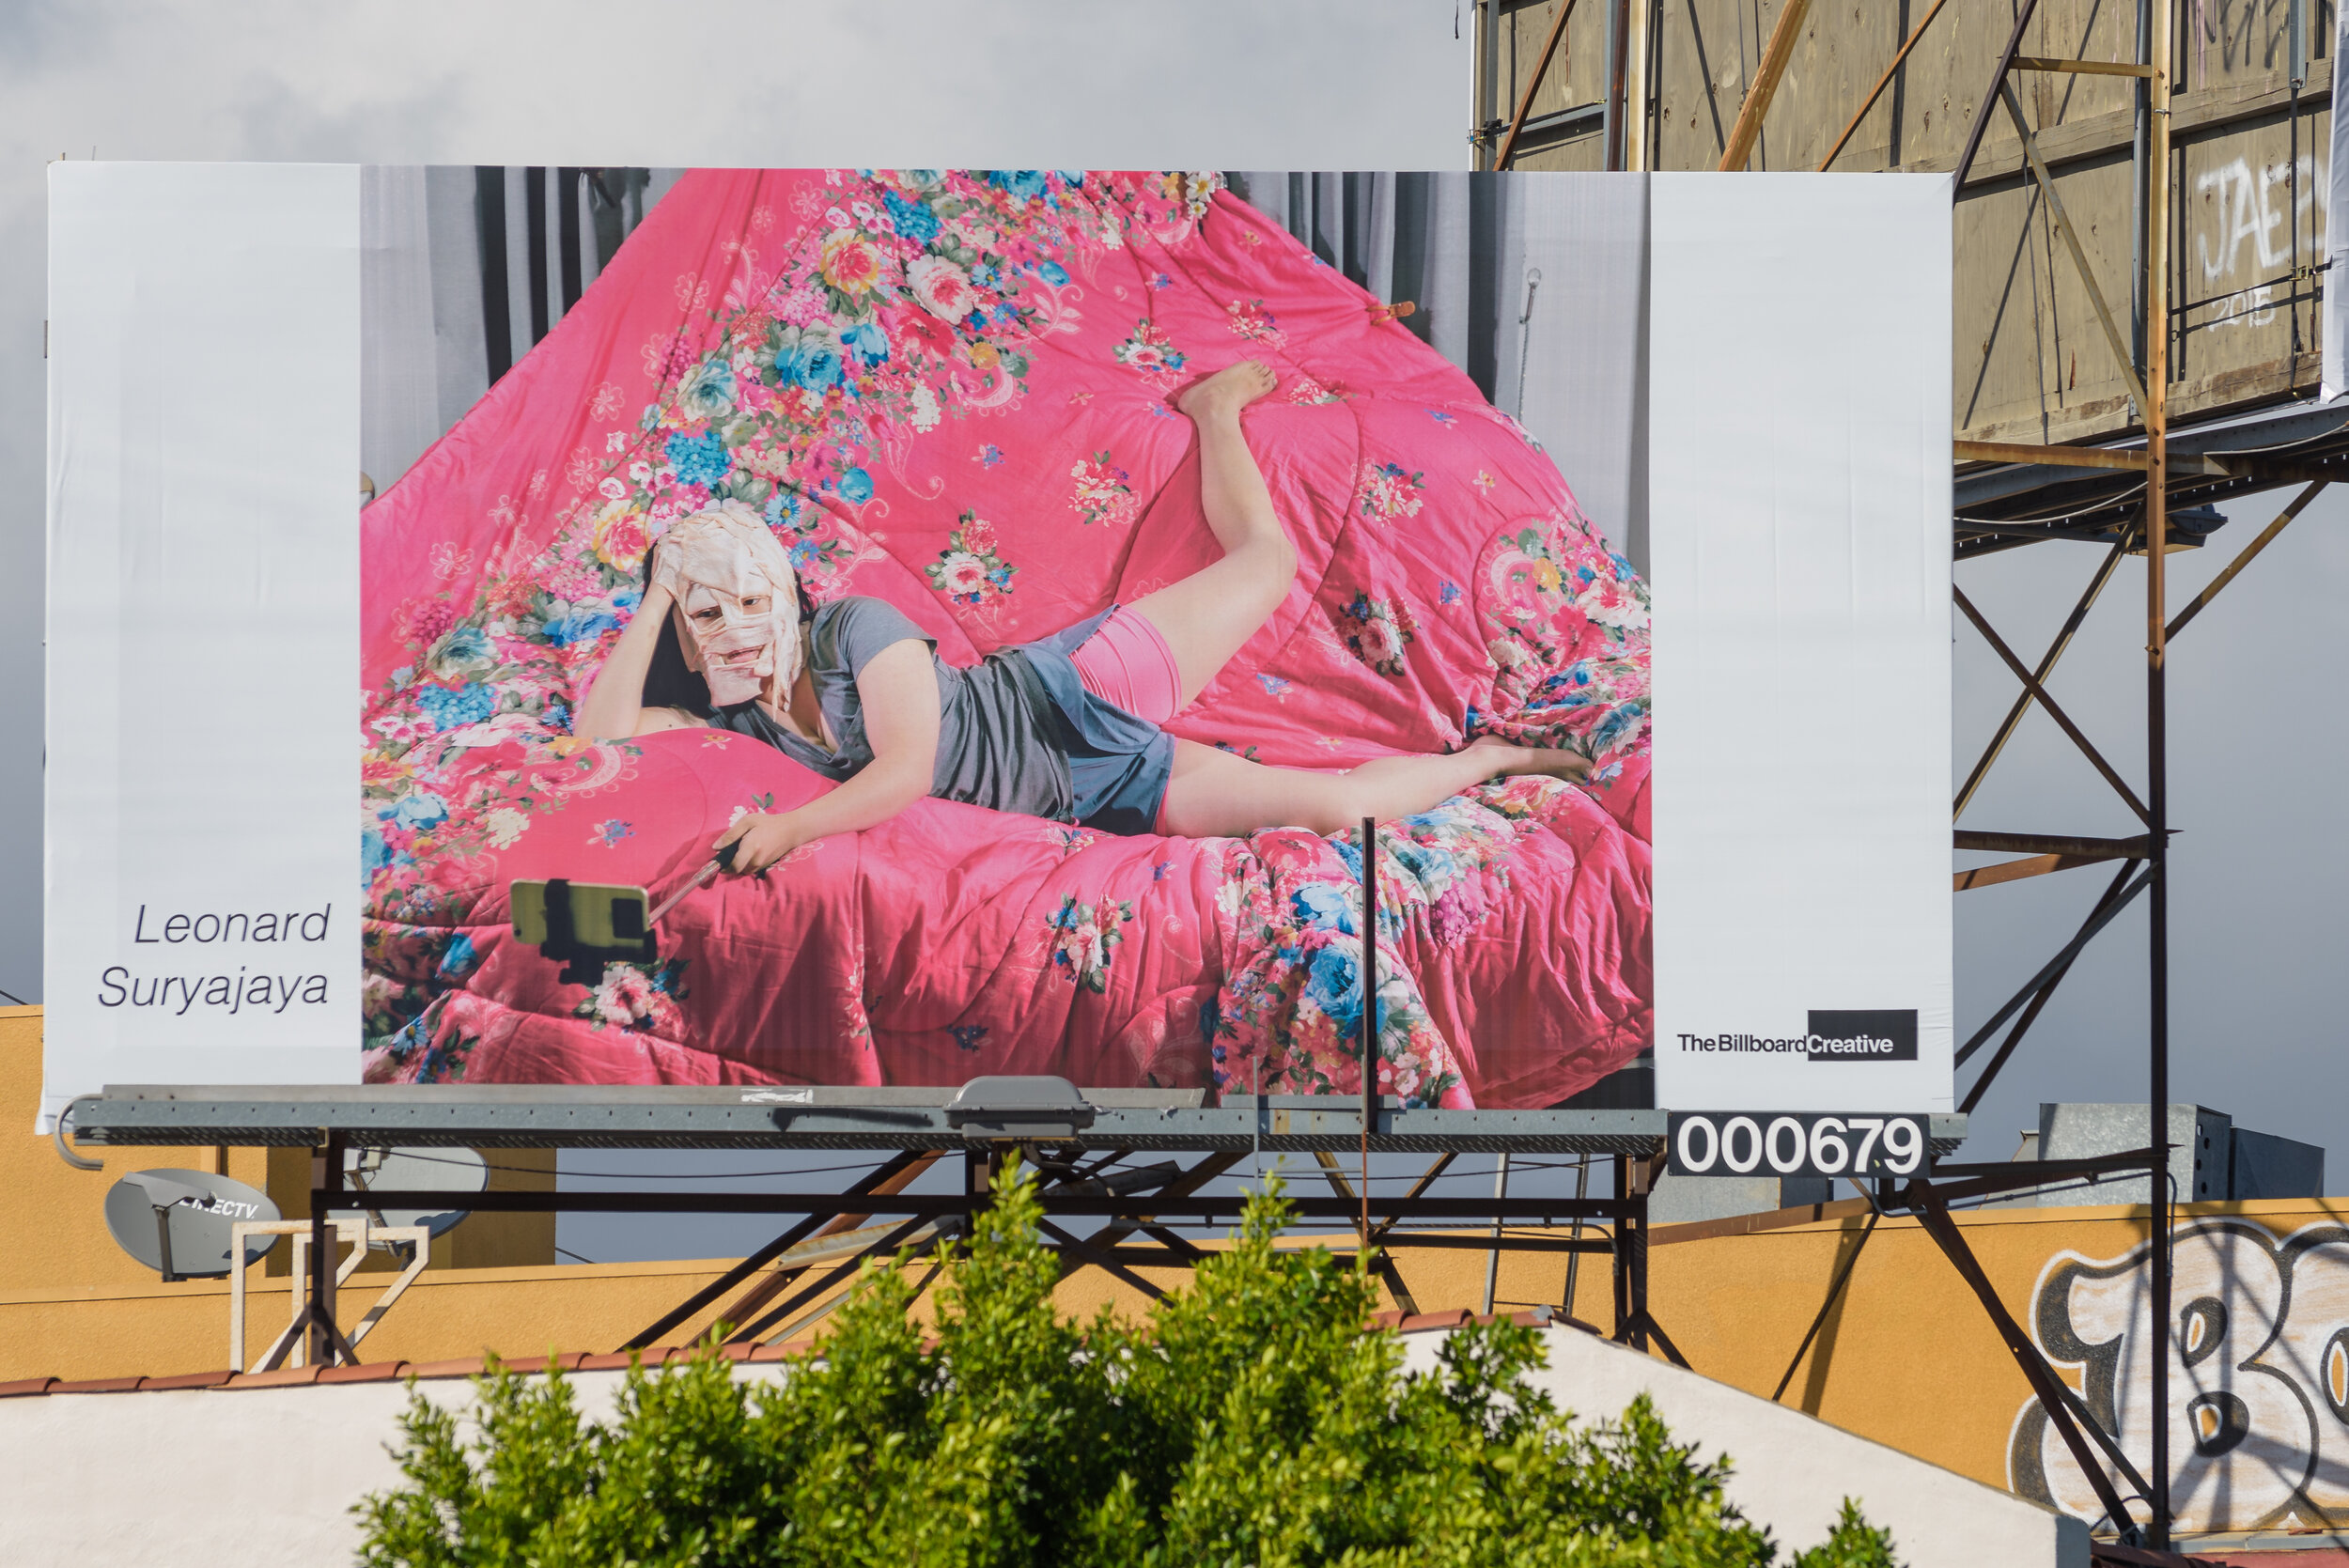 "Musing" on The Billboard Creative in Los Angeles, 2016